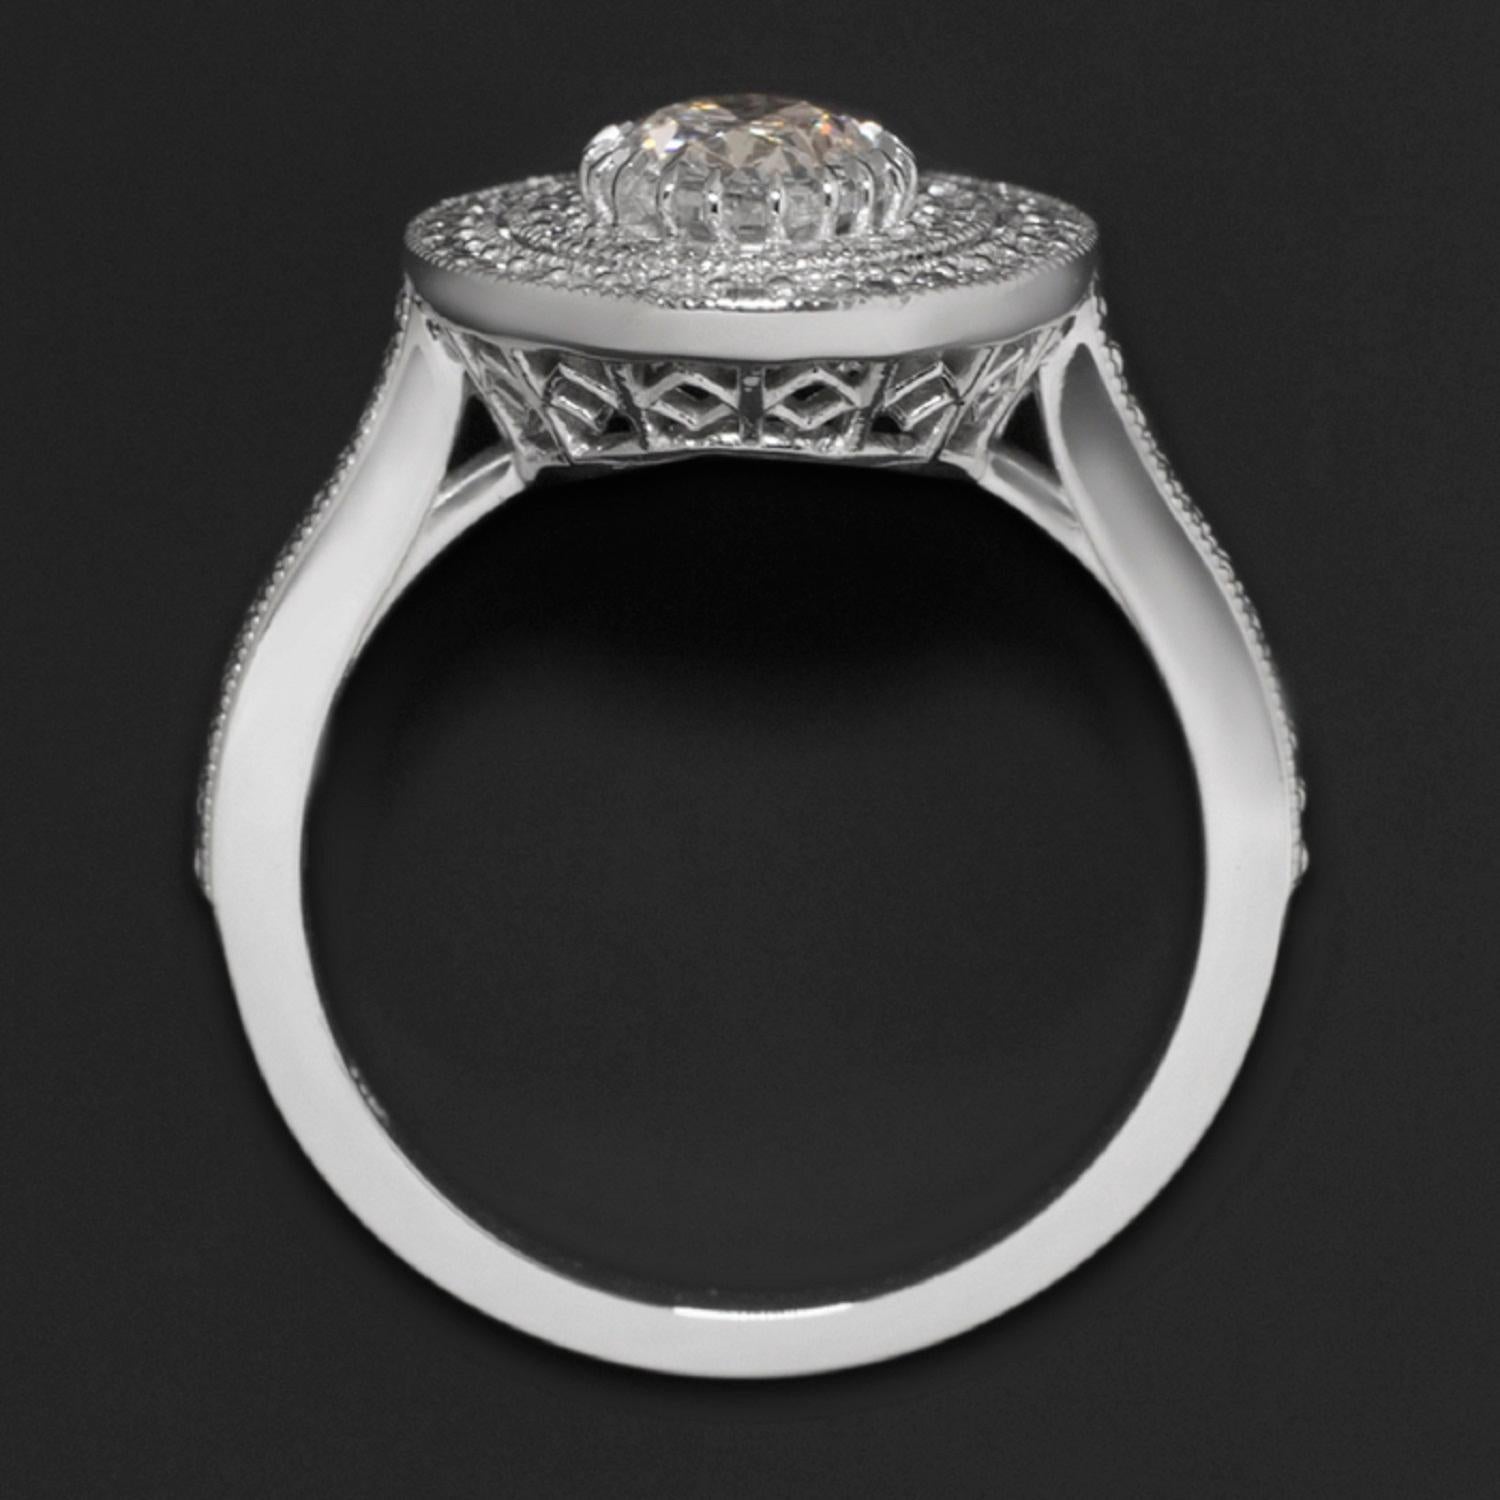 Modern Gia Certified 1.30 Carat Oval Diamond Engagement Cocktail Ring